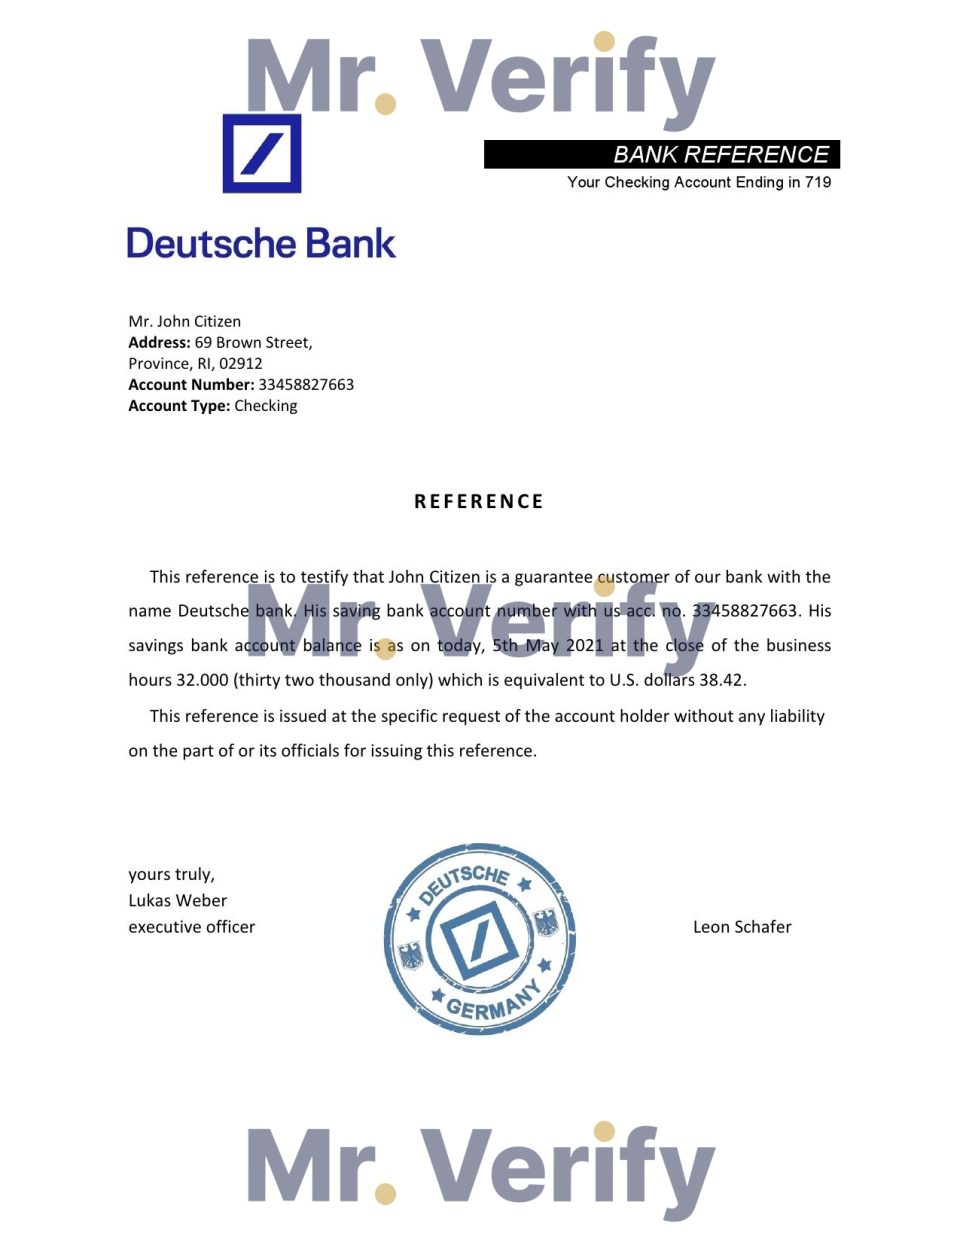 Download Germany Deutsche Bank Reference Letter Templates | Editable Word